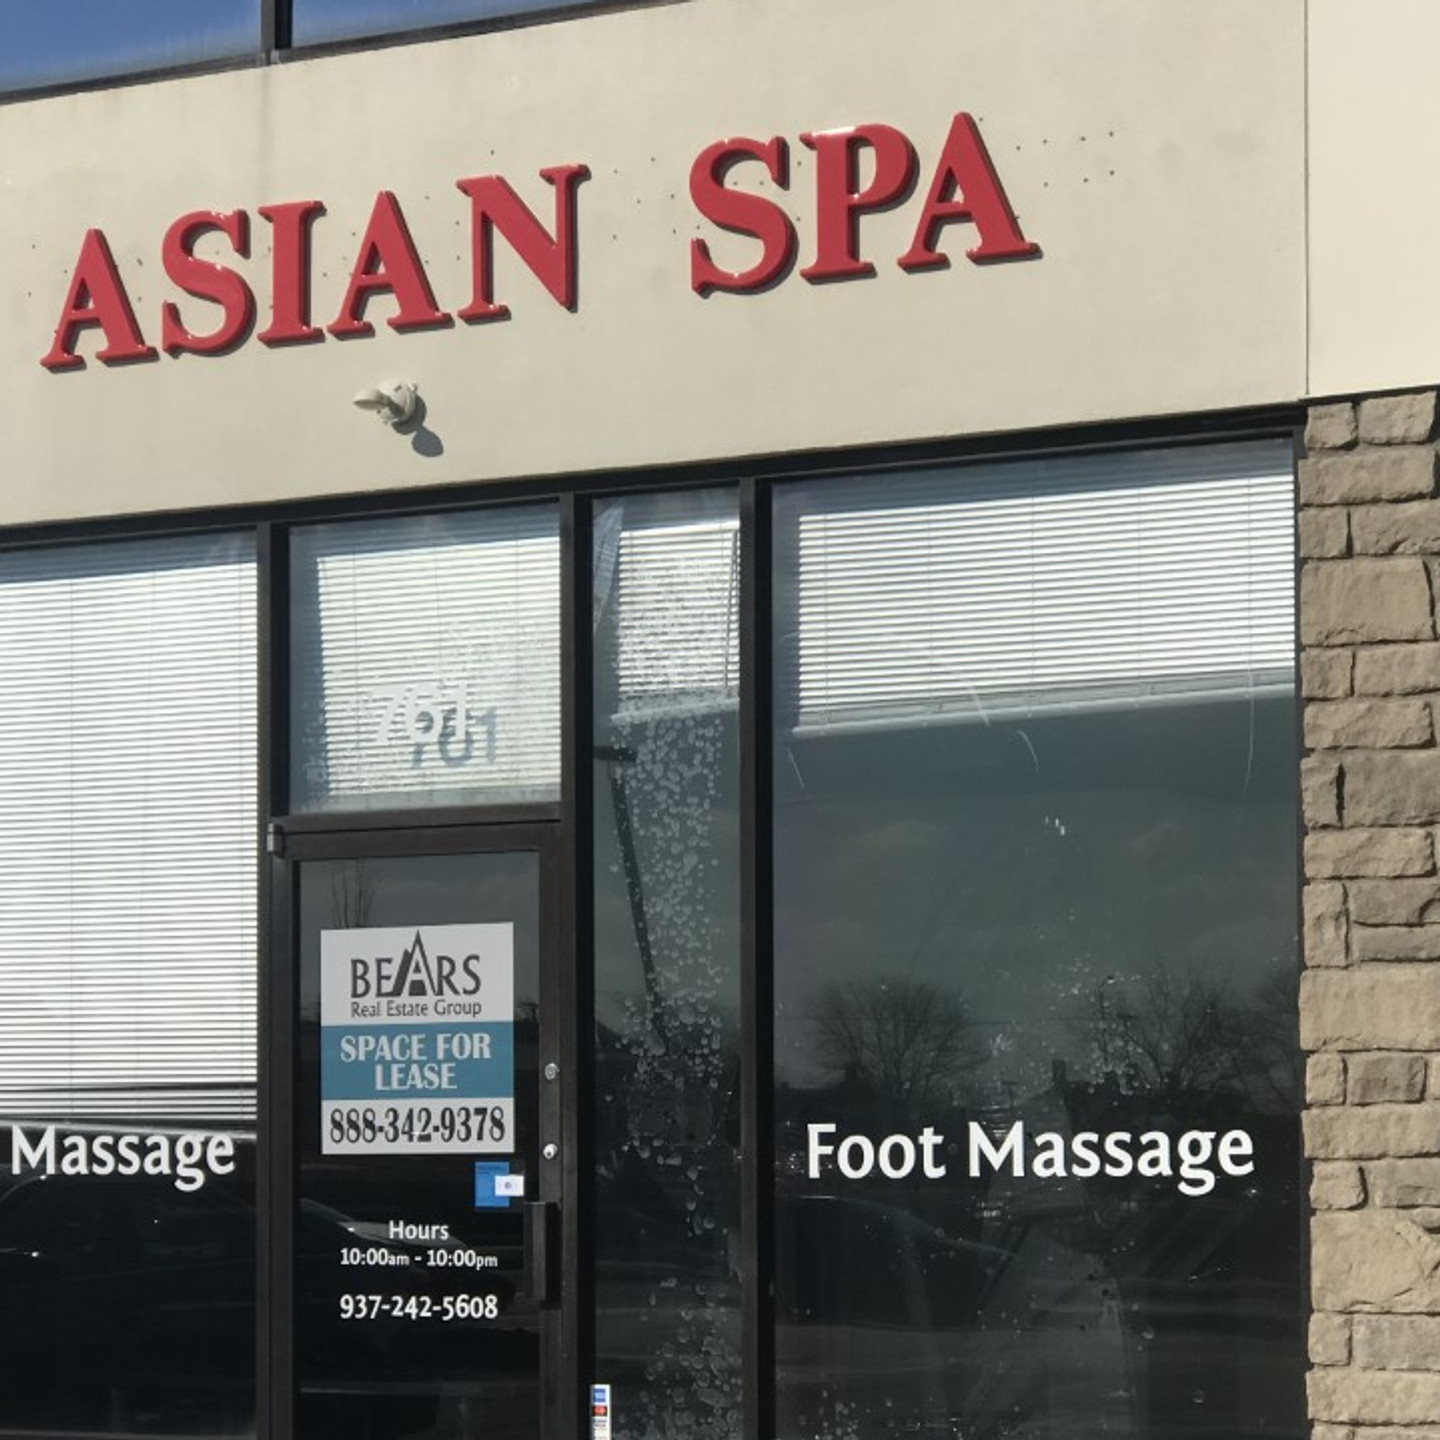 cia love recommends chicago erotic massage parlor pic